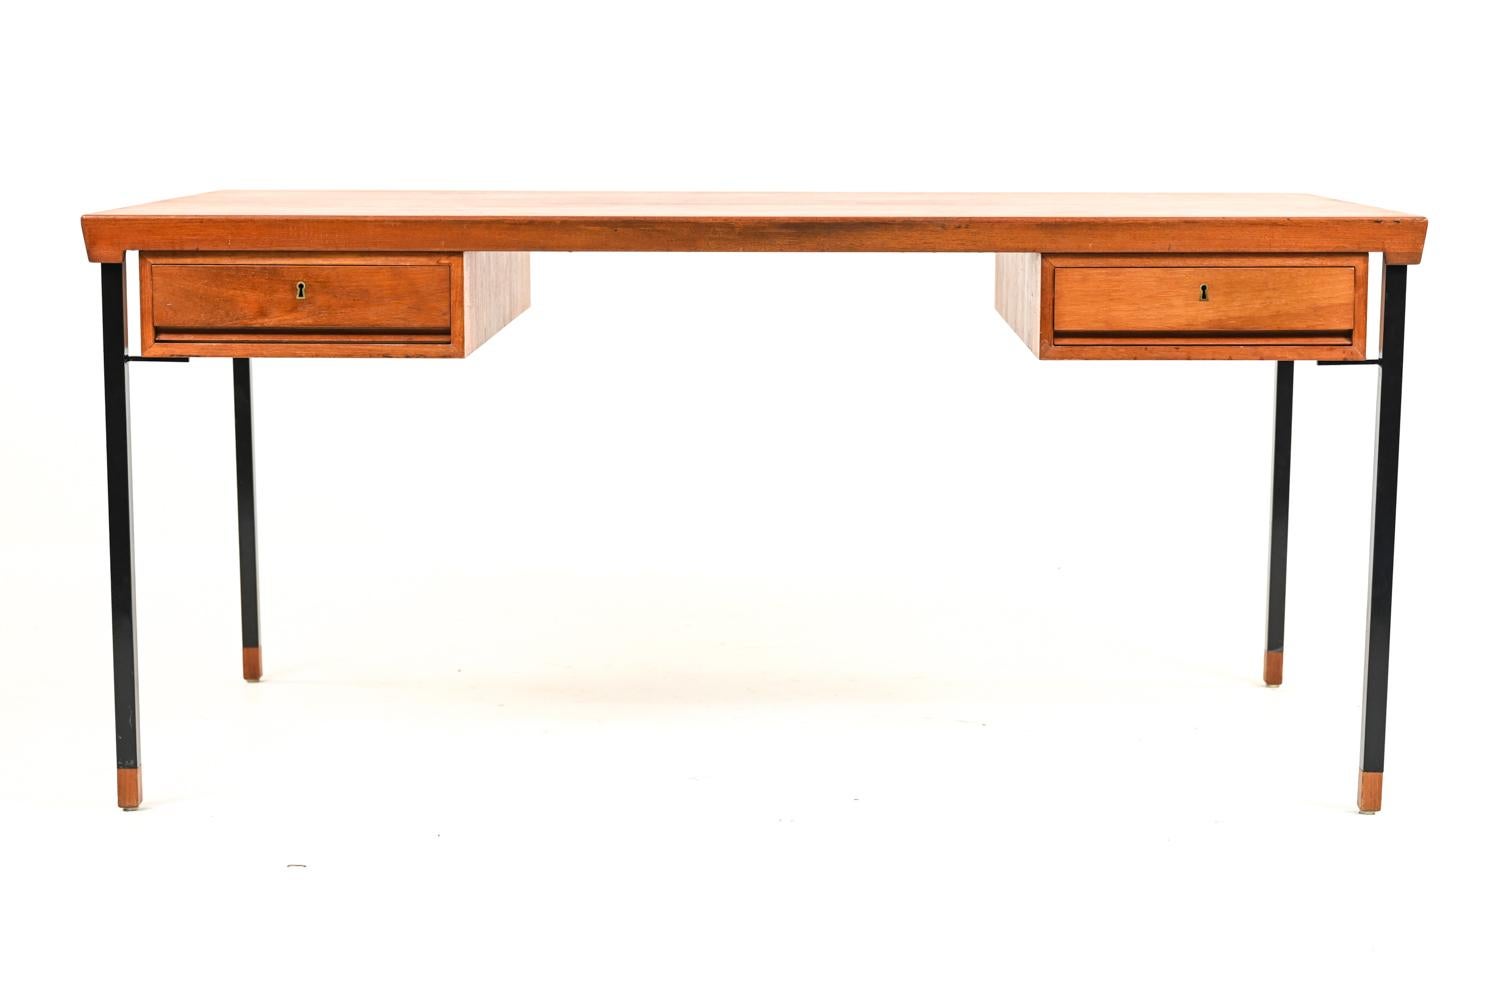 This fabulous Danish teak mid-century writing desk was the result of a collaborative design effort by Peter Hvidt and Orla Mølgaard-Nielsen for Soborg Mobelfabrik, circa 1950s. Like Hvidt and Molgaard's other collaborations, this desk features steel